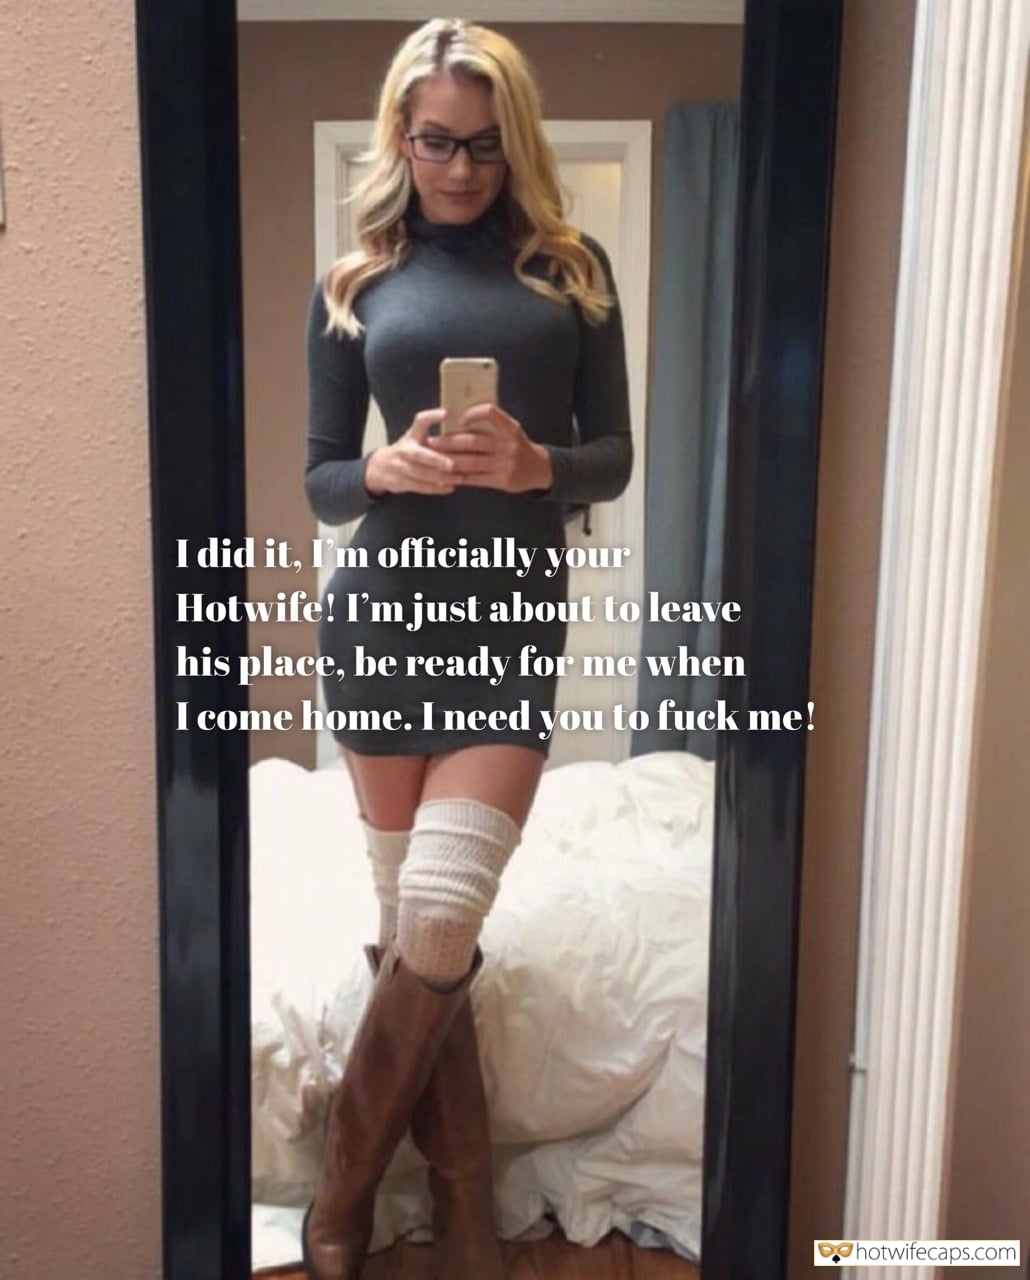 My Favorite Hotwife Caption №559199 Come with the cum in pussy image